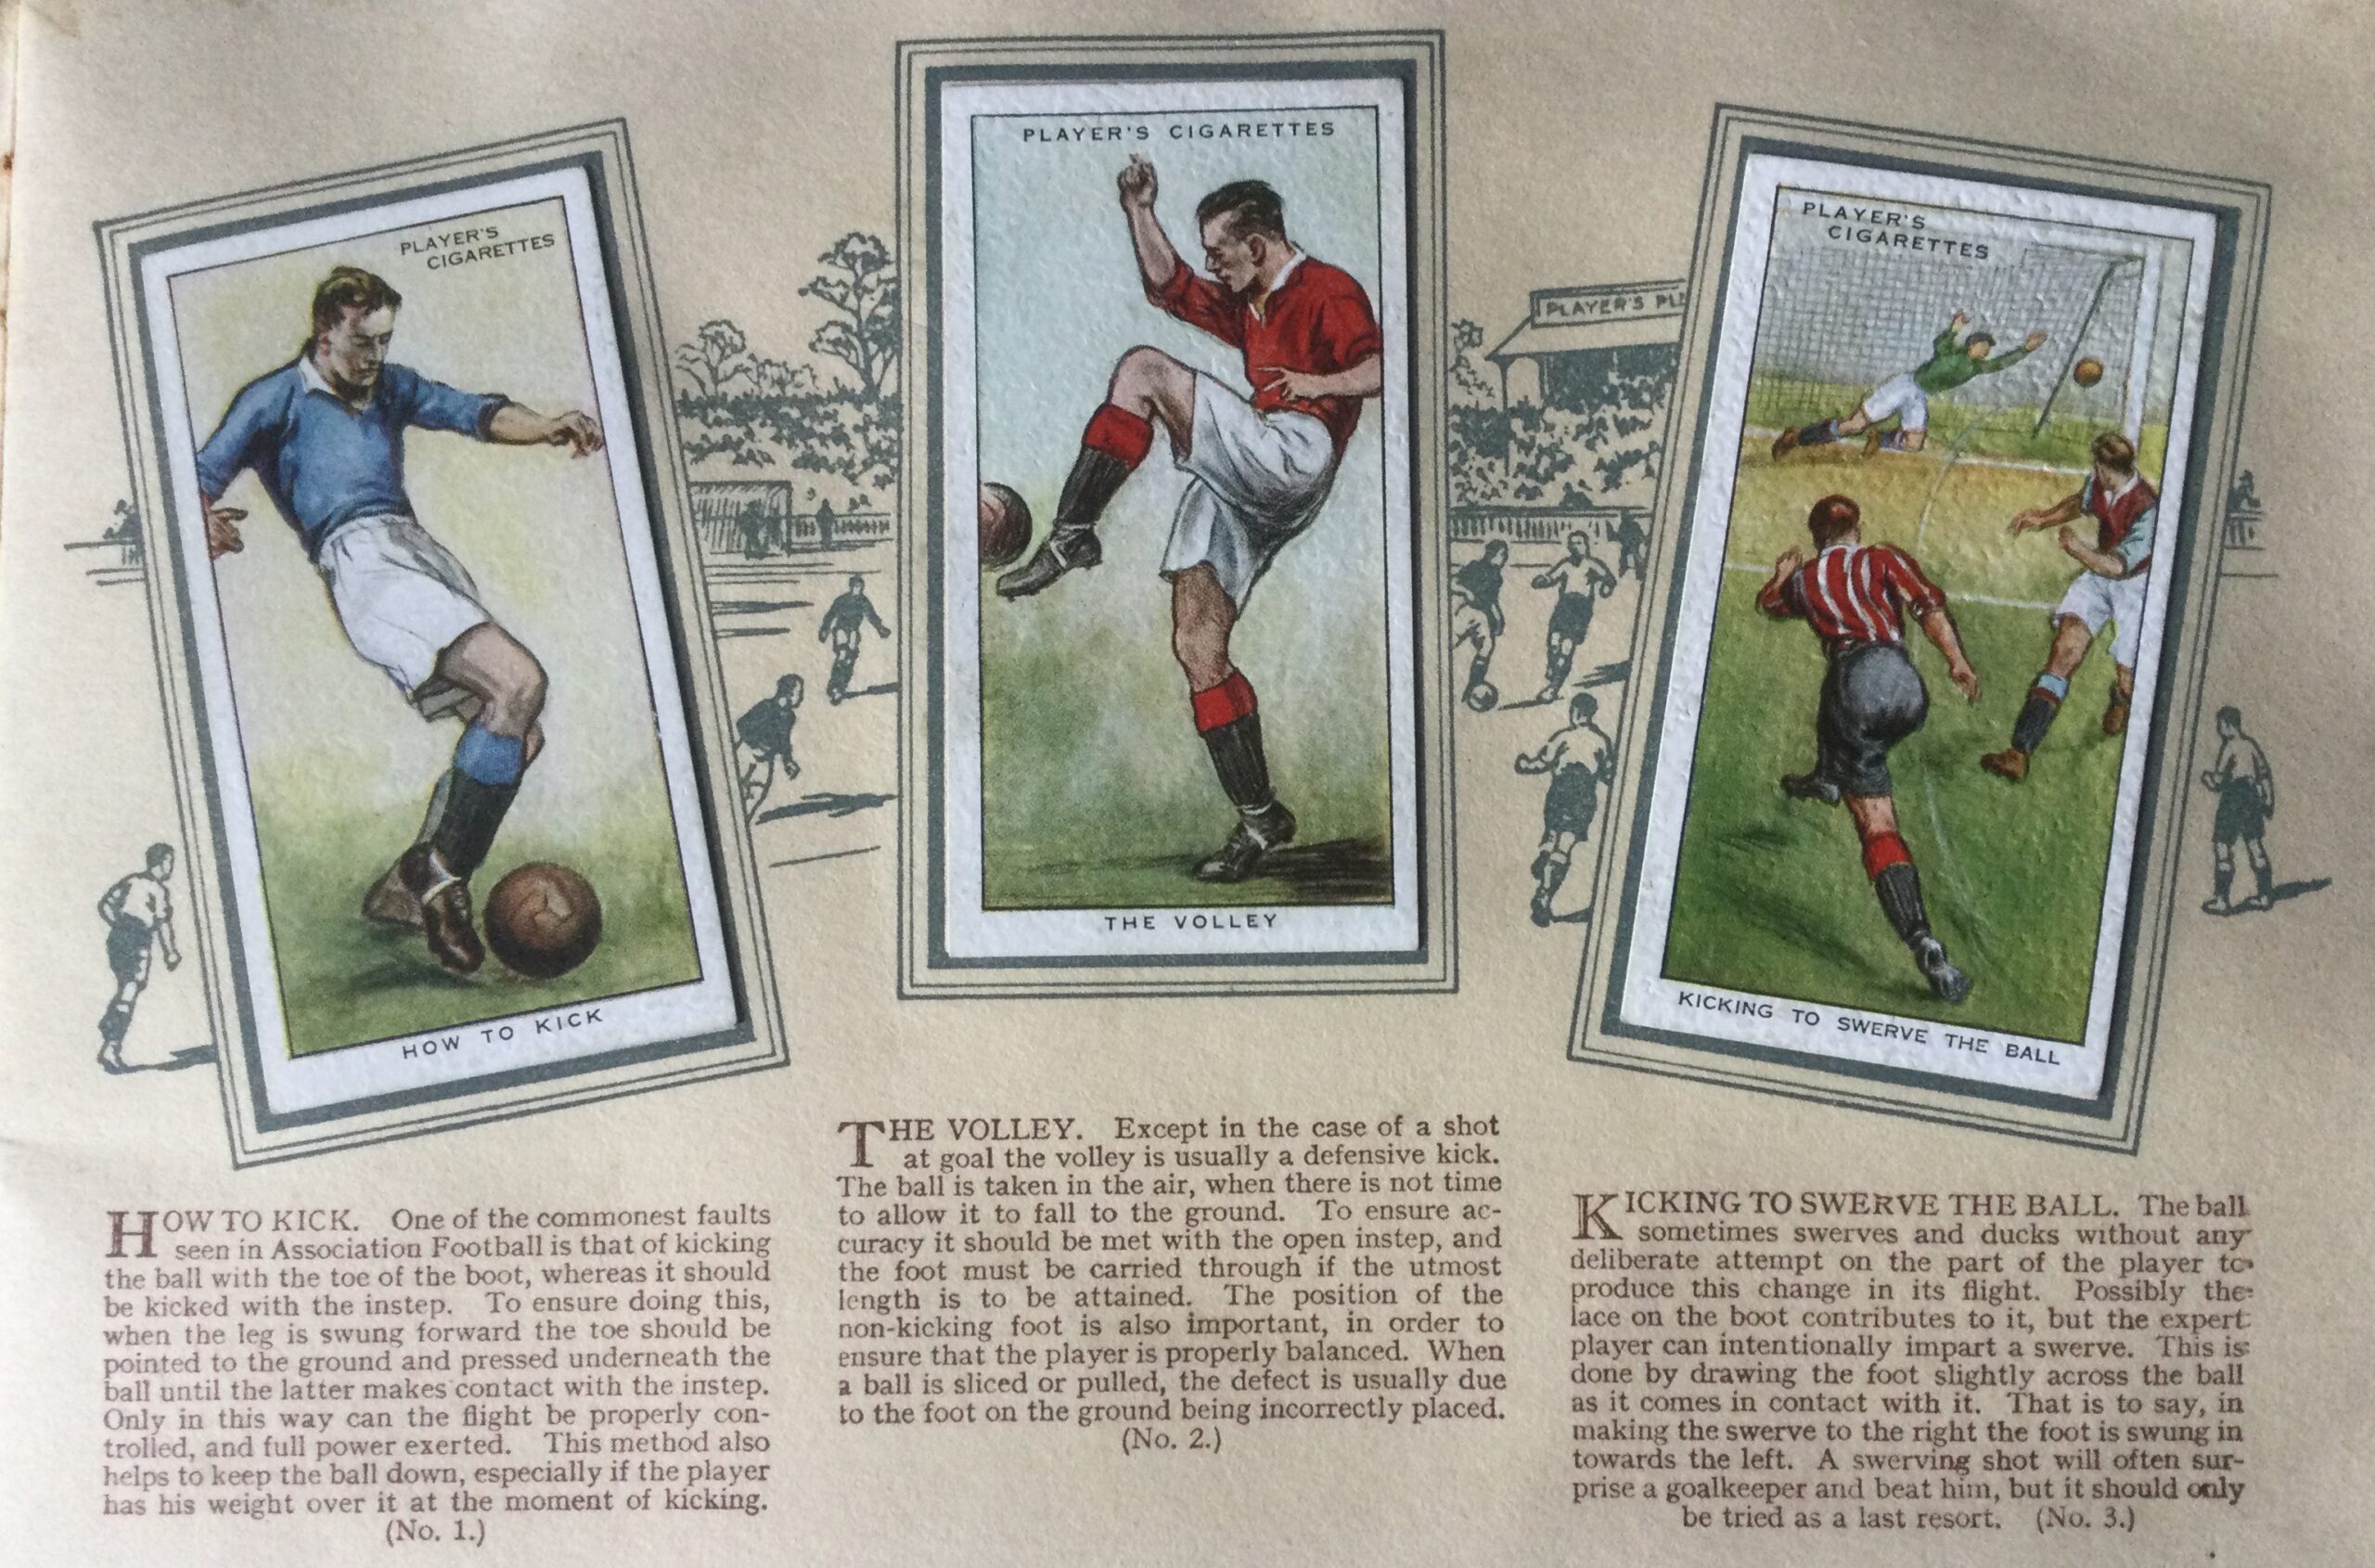 Players Cigarette Cards showing how to kick, the volley and kicking to swerve the ball